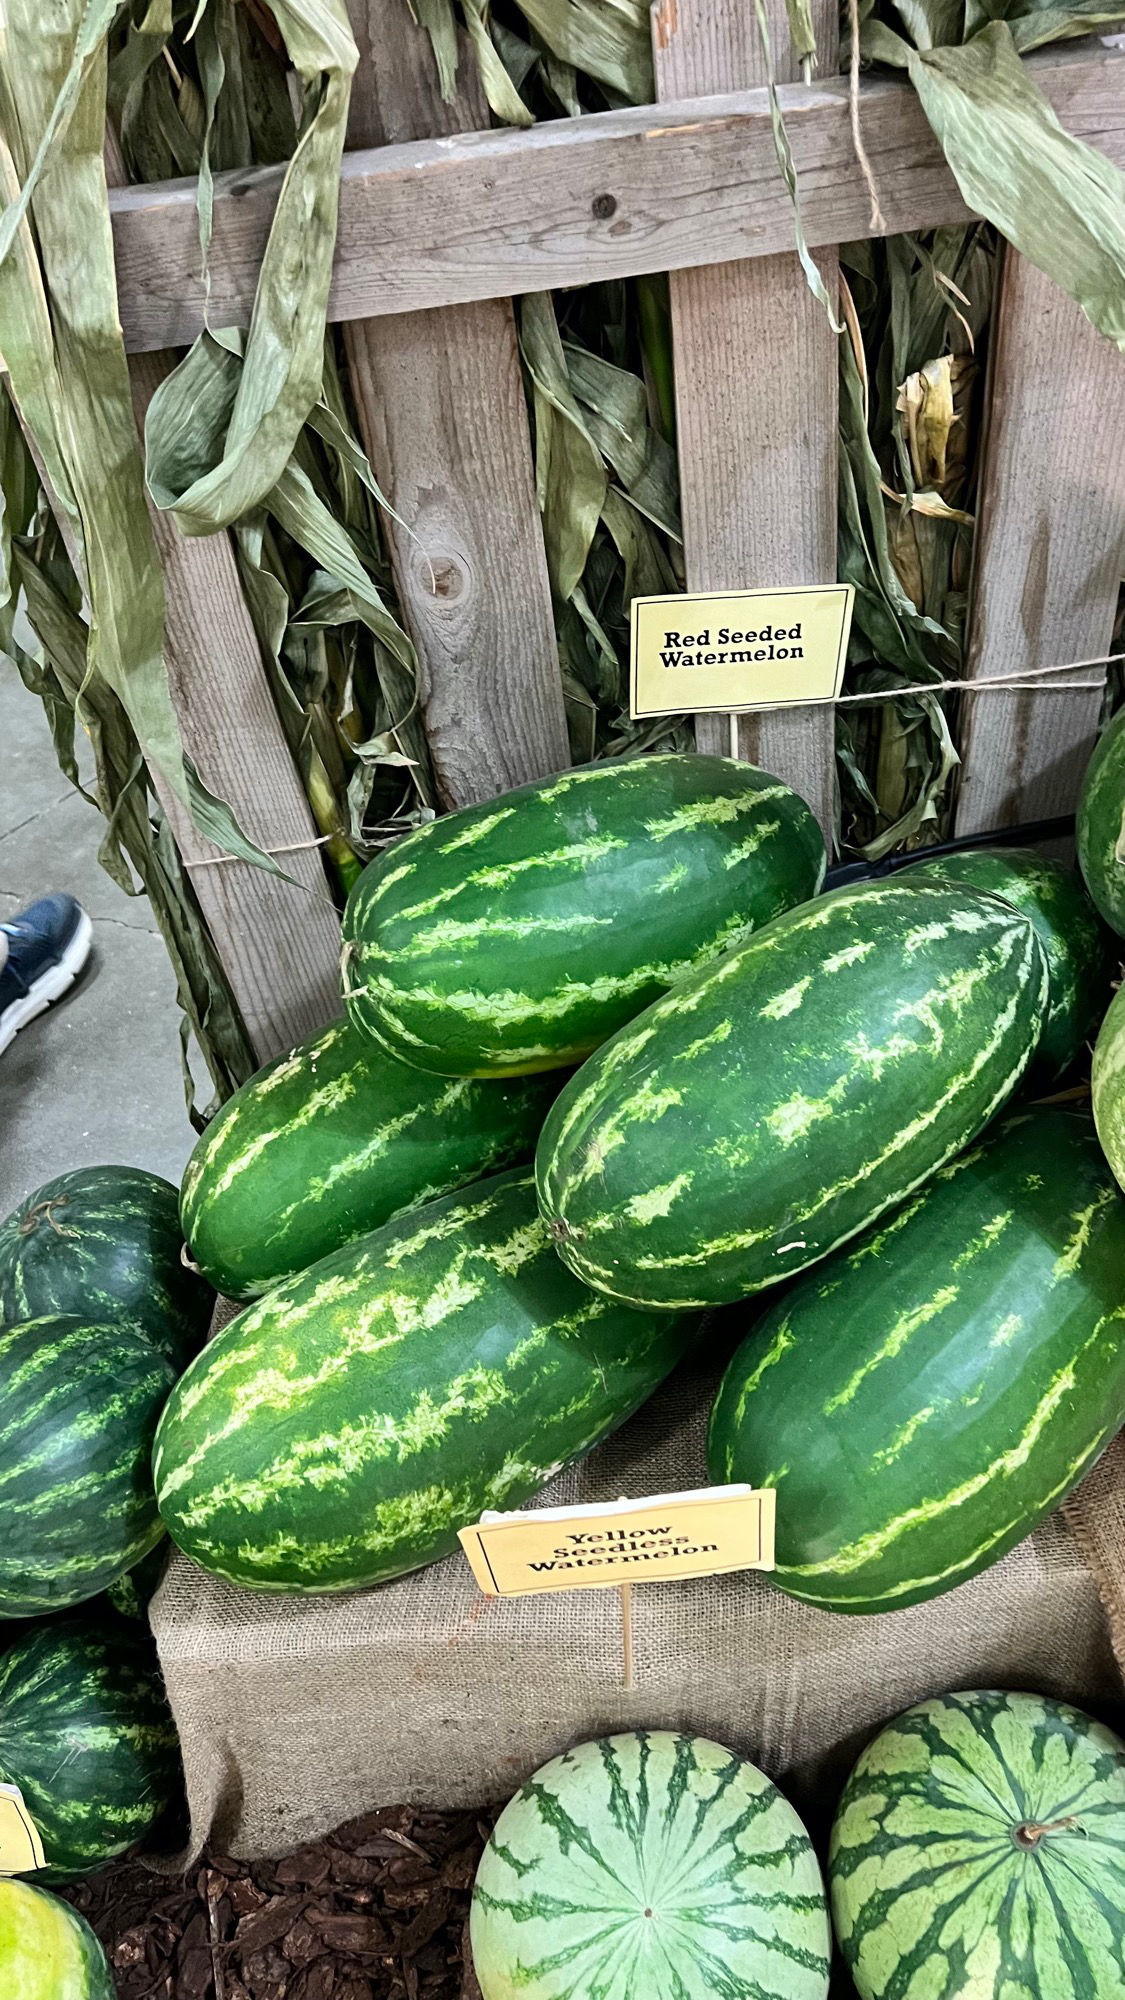 Underwood Family Farms Red Seeded Watermelon